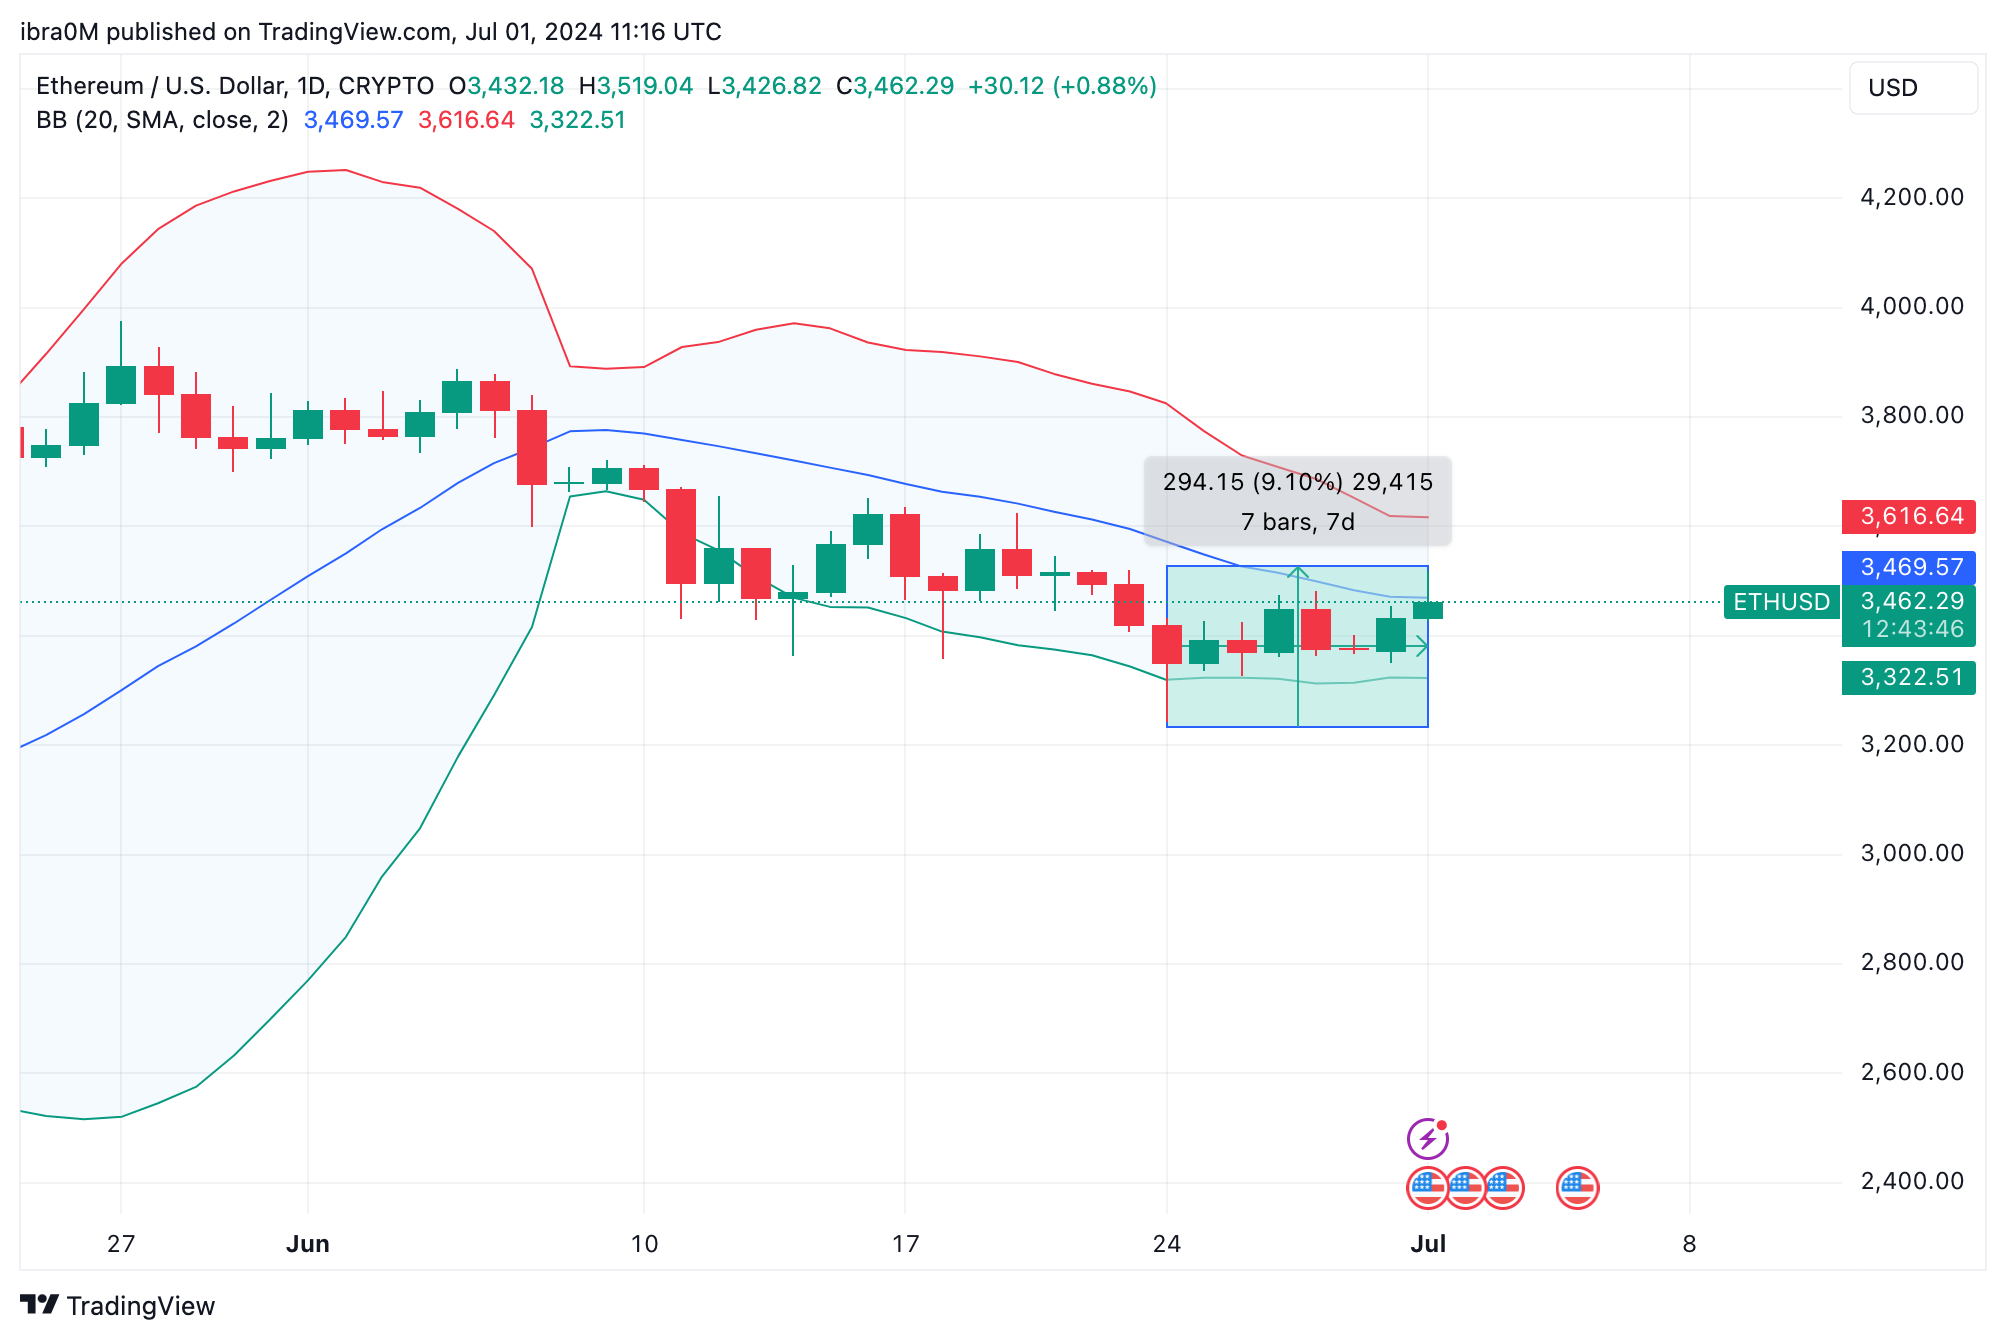 Ethereum Price Action After SEC Delays ETH ETF Launch | July 1 2024 | TradingView